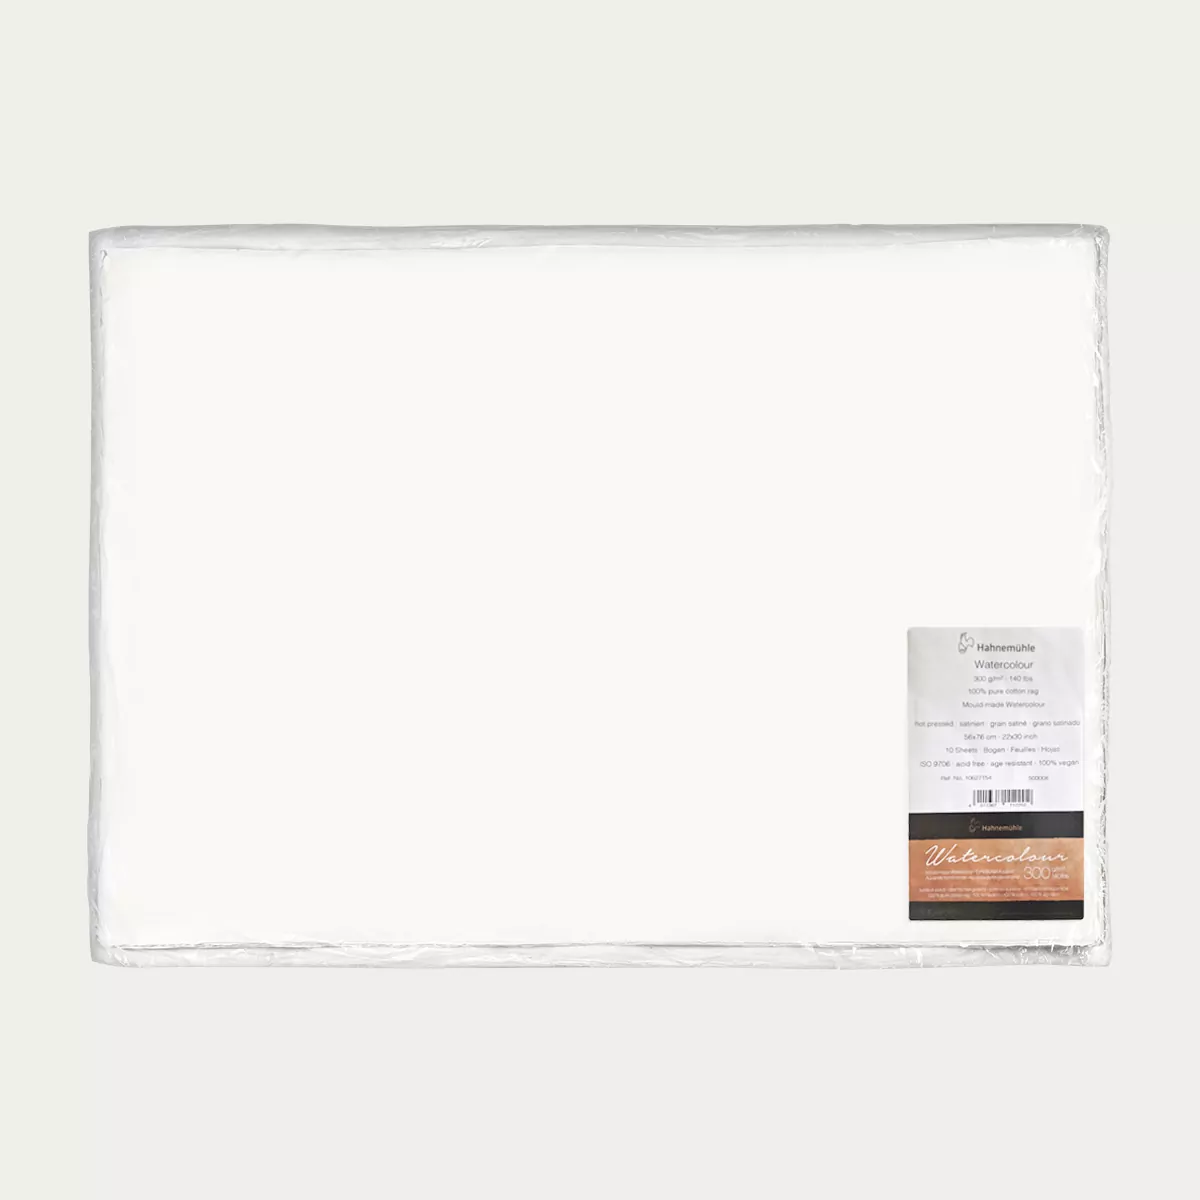 Hahnemühle Watercolor cold pressed 106x78cm 300gsm (5 sheets)